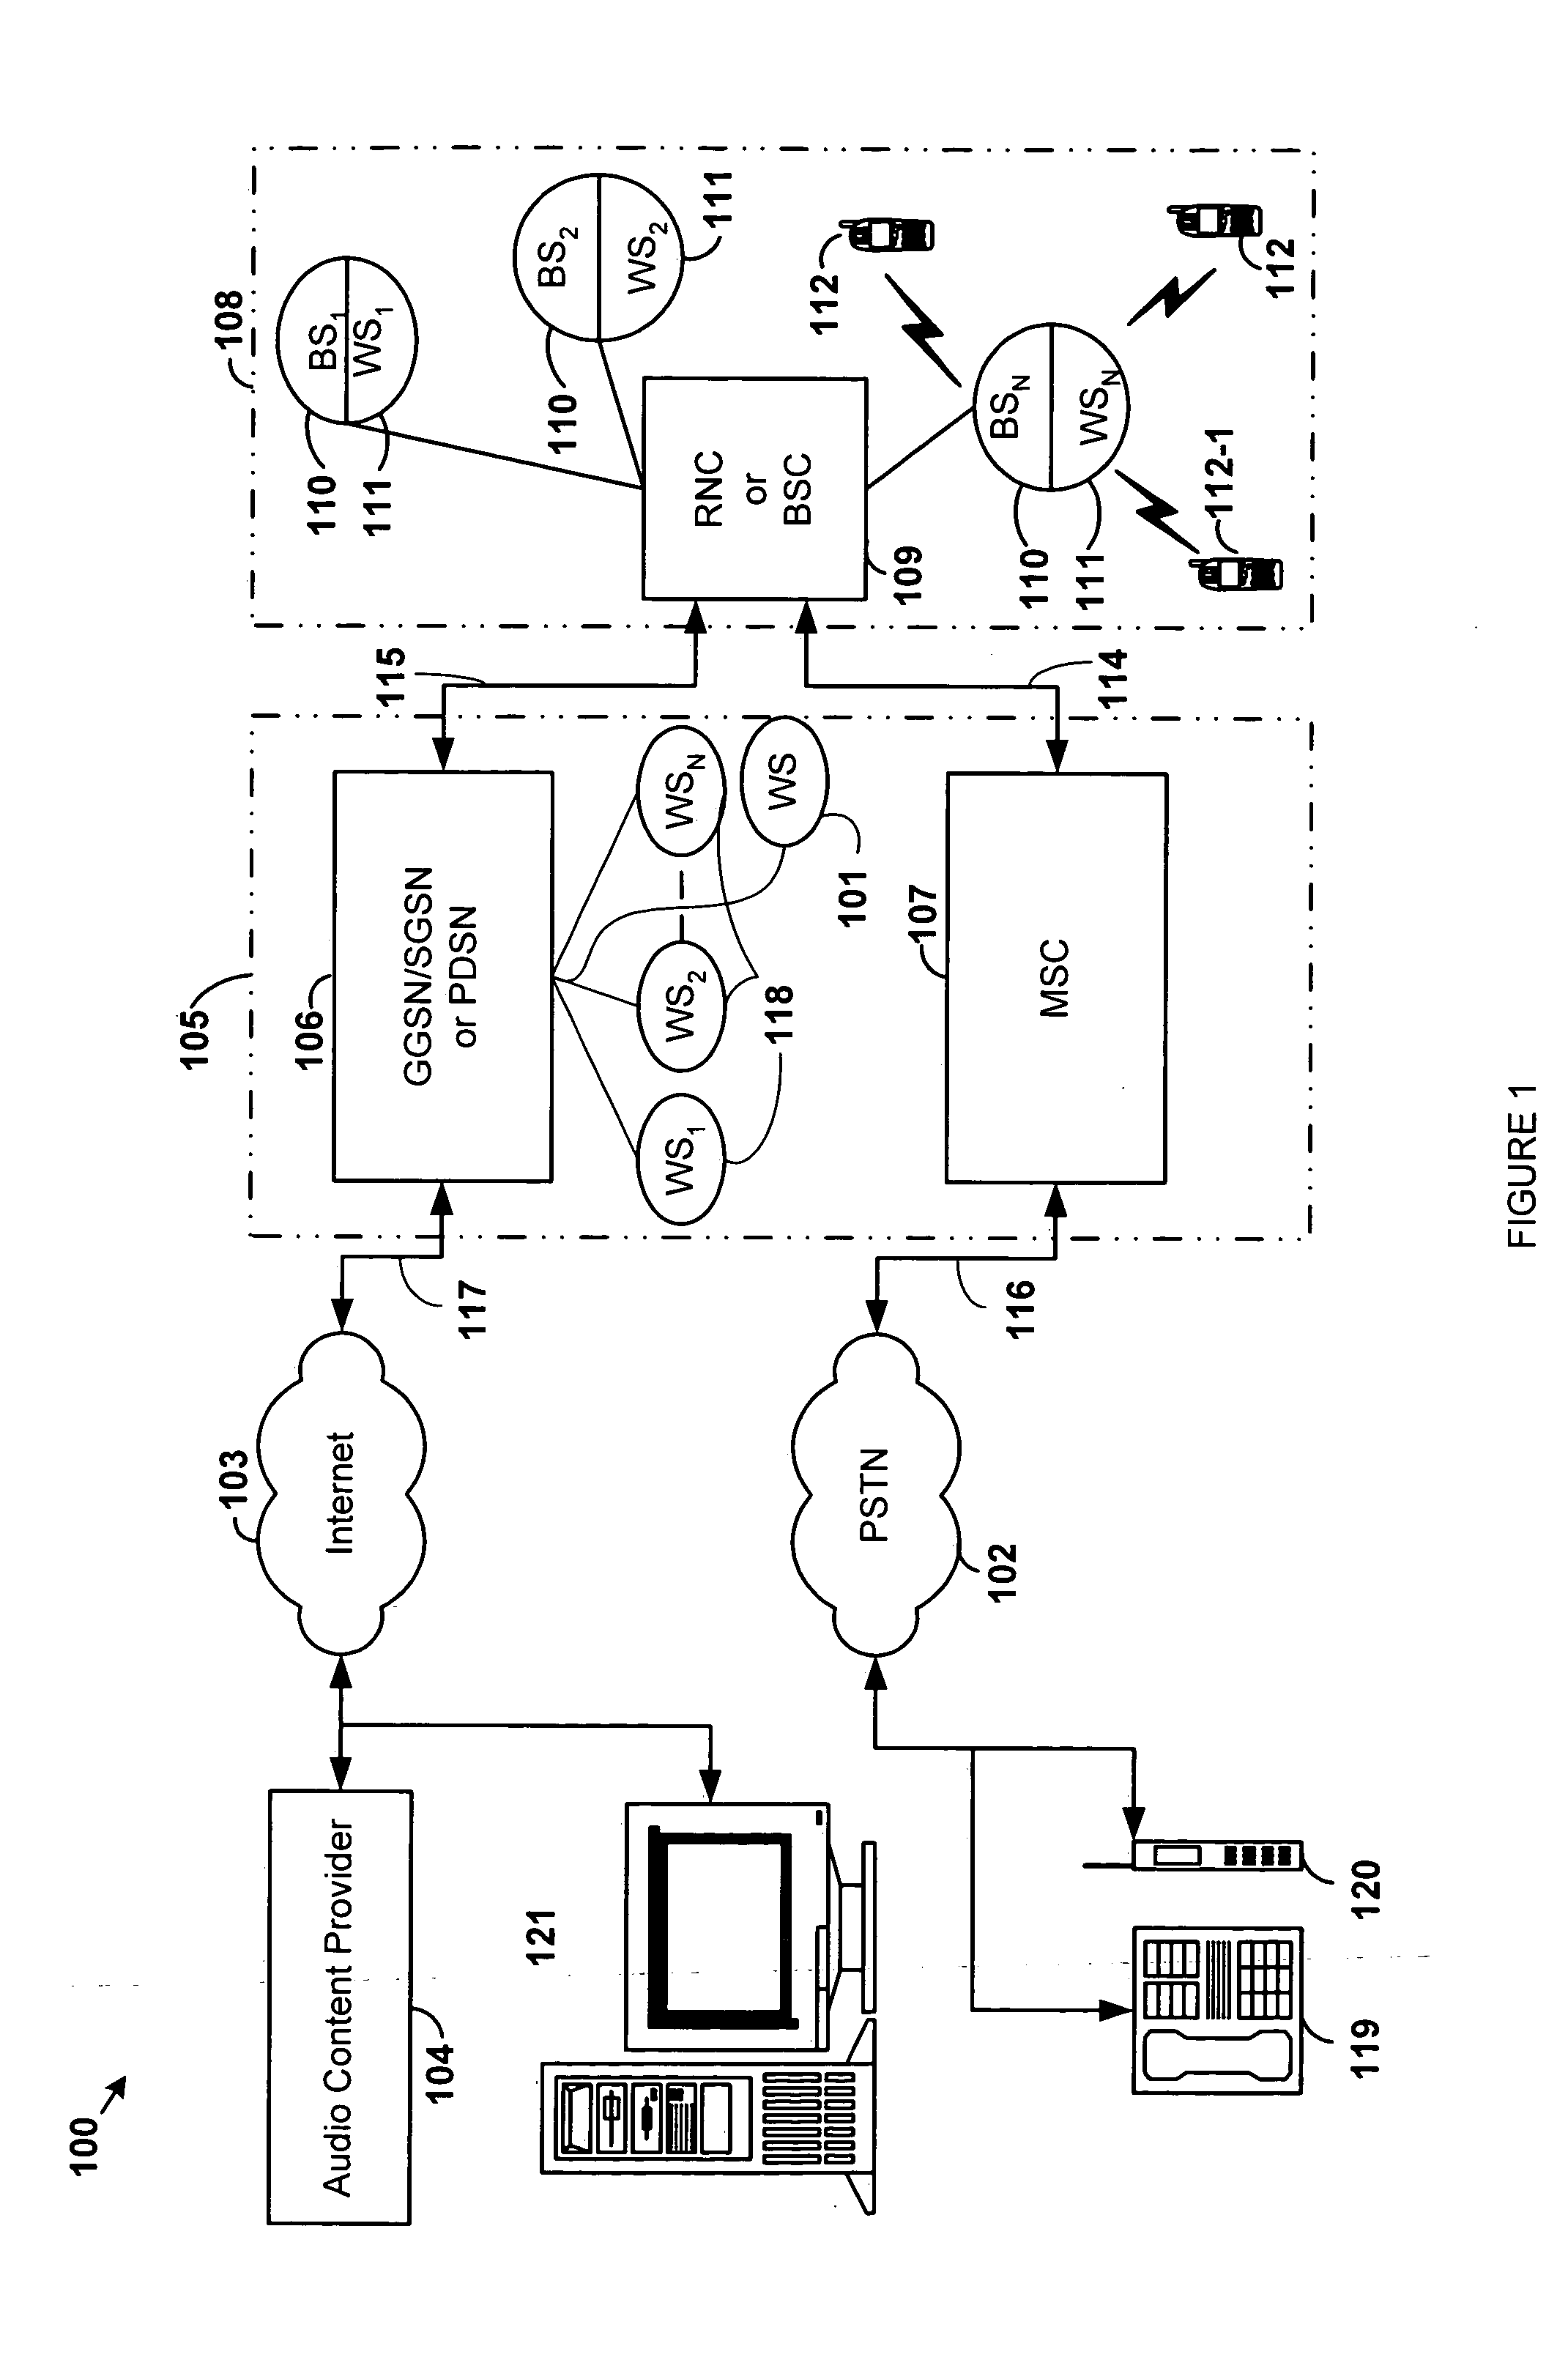 System and method for wireless delivery of audio content over wireless high speed data networks